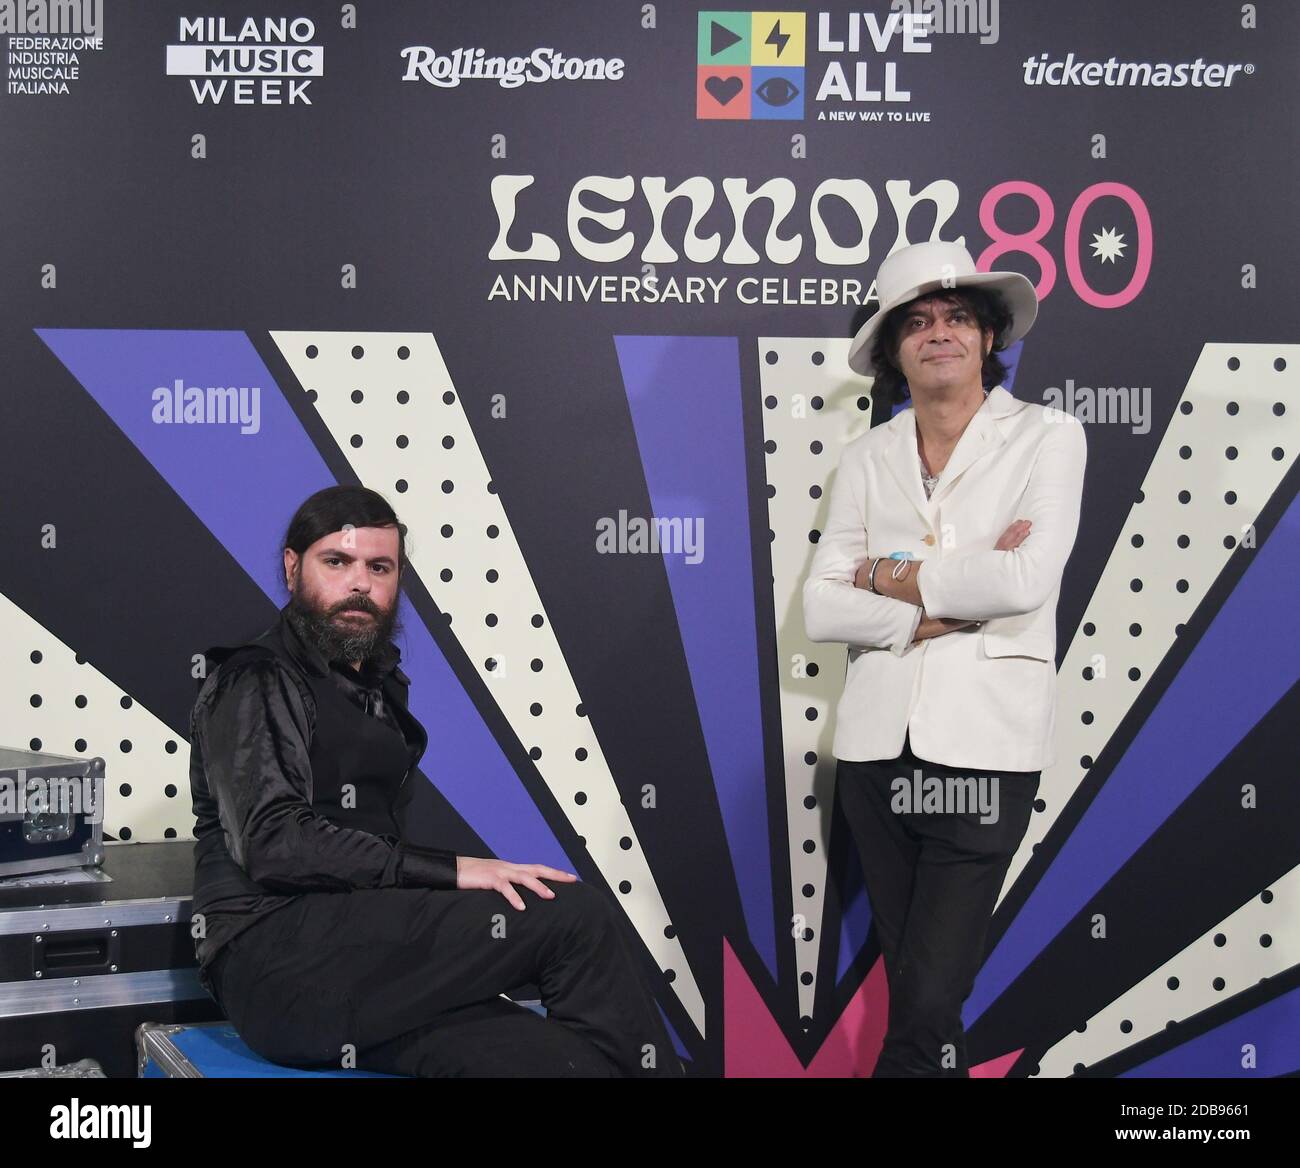 Milan, Italy. 16th Nov, 2020. Milan, Italy At Fabrique Milano Music Week, curated by Luca de Gennaro, an evening dedicated to John Lennon LENNON80 with various artists playing and singing some of his songs. In the photo: Roberto Dell'Era (Afterhours, The Winstons), Lino Gitto (The Winstons) Credit: Independent Photo Agency/Alamy Live News Stock Photo